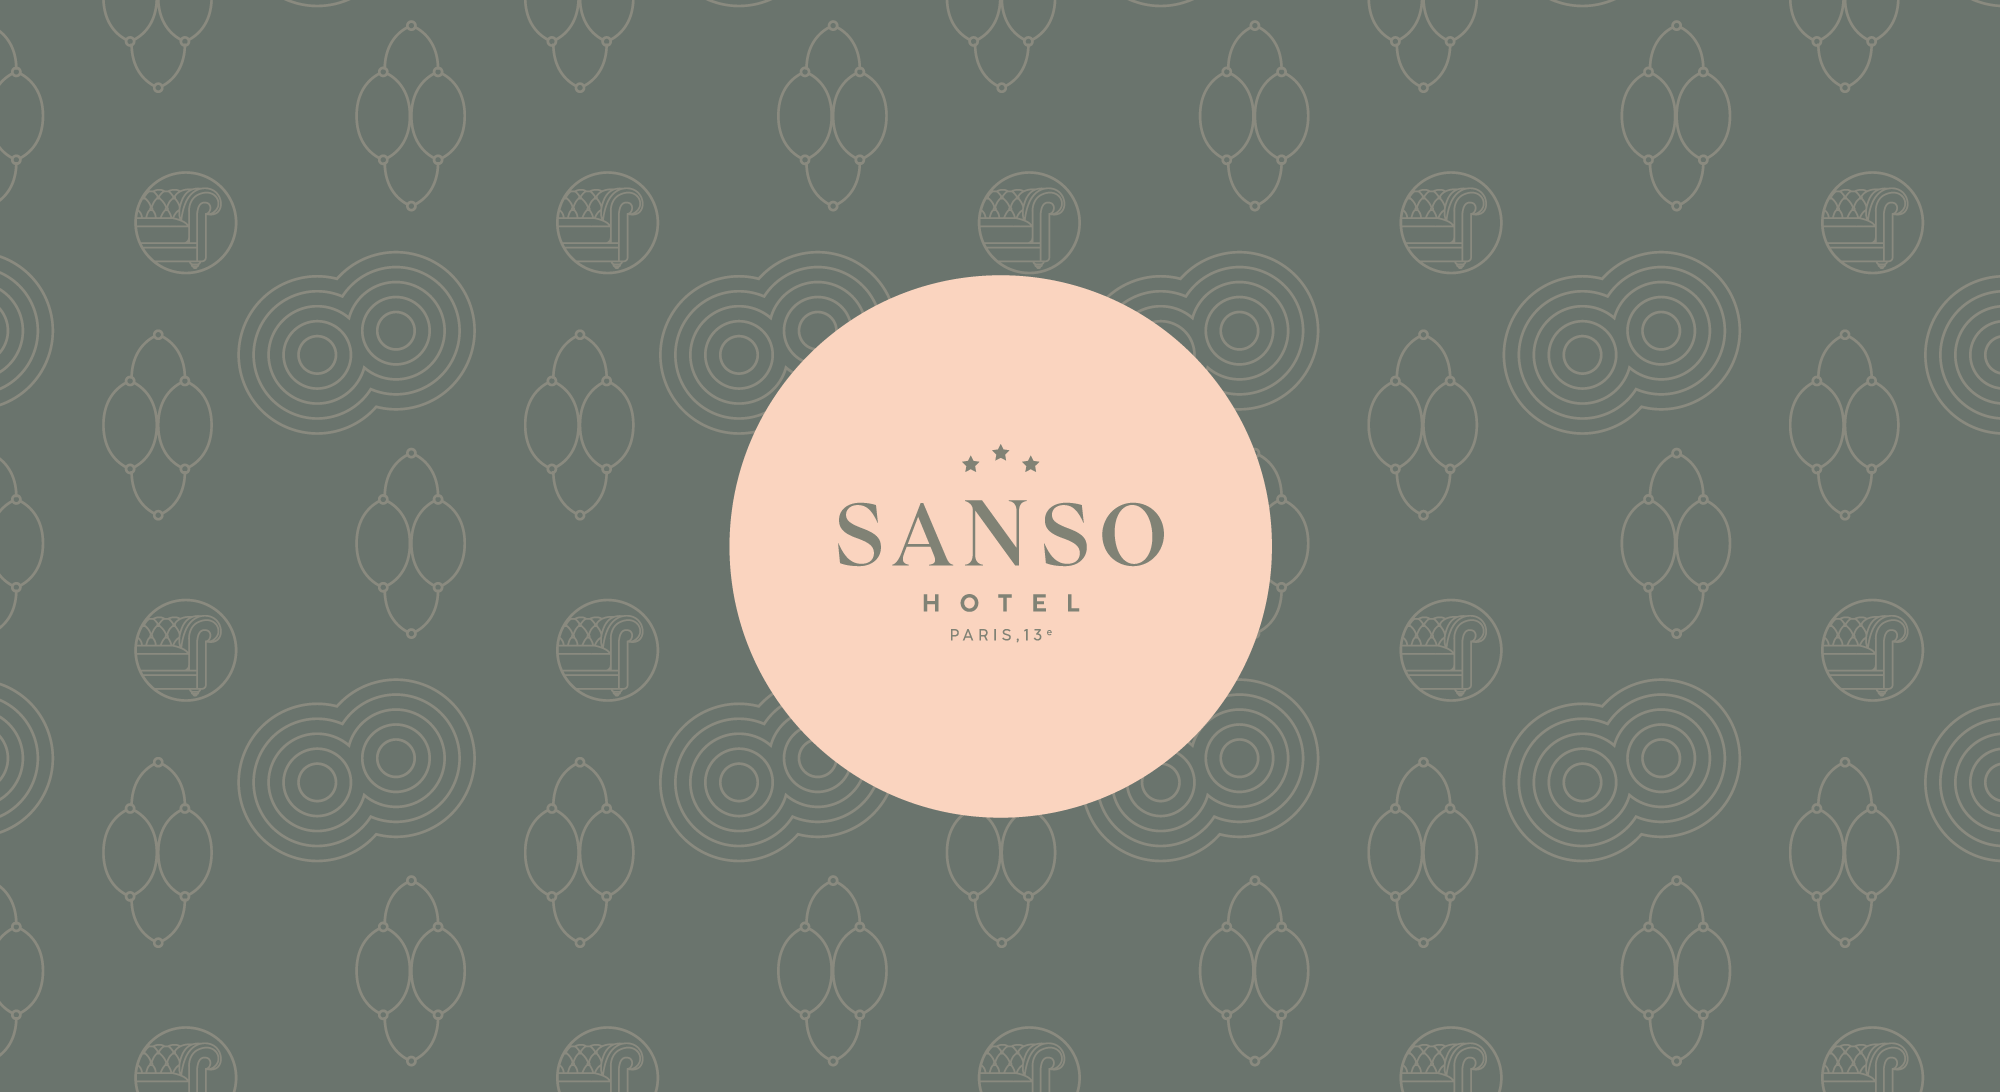 Sanso Hotel pattern and badge logo